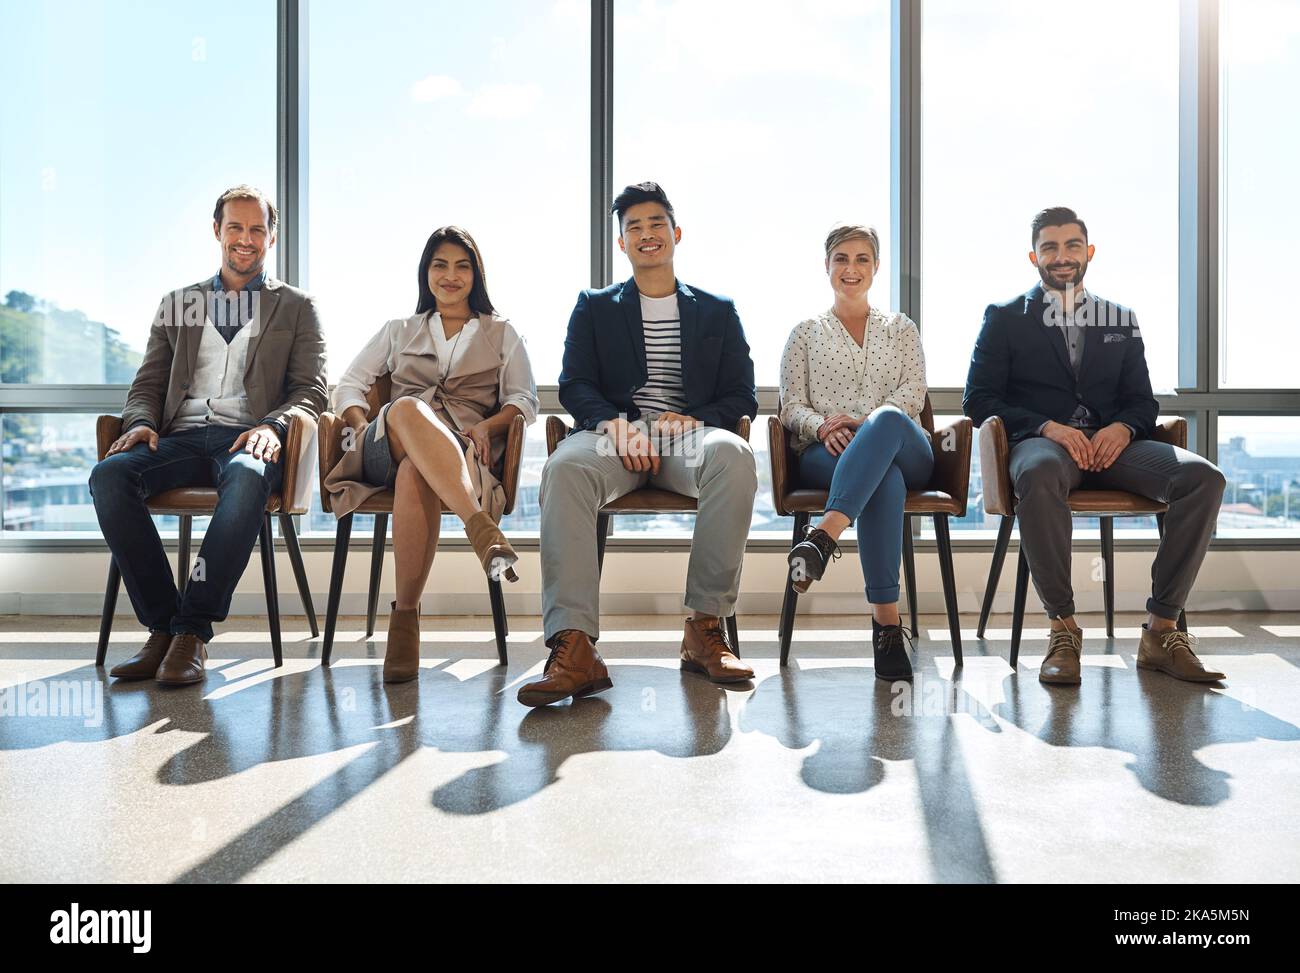 Were all in a good mood today. Portrait of a group of businesspeople sitting in line in an office. Stock Photo